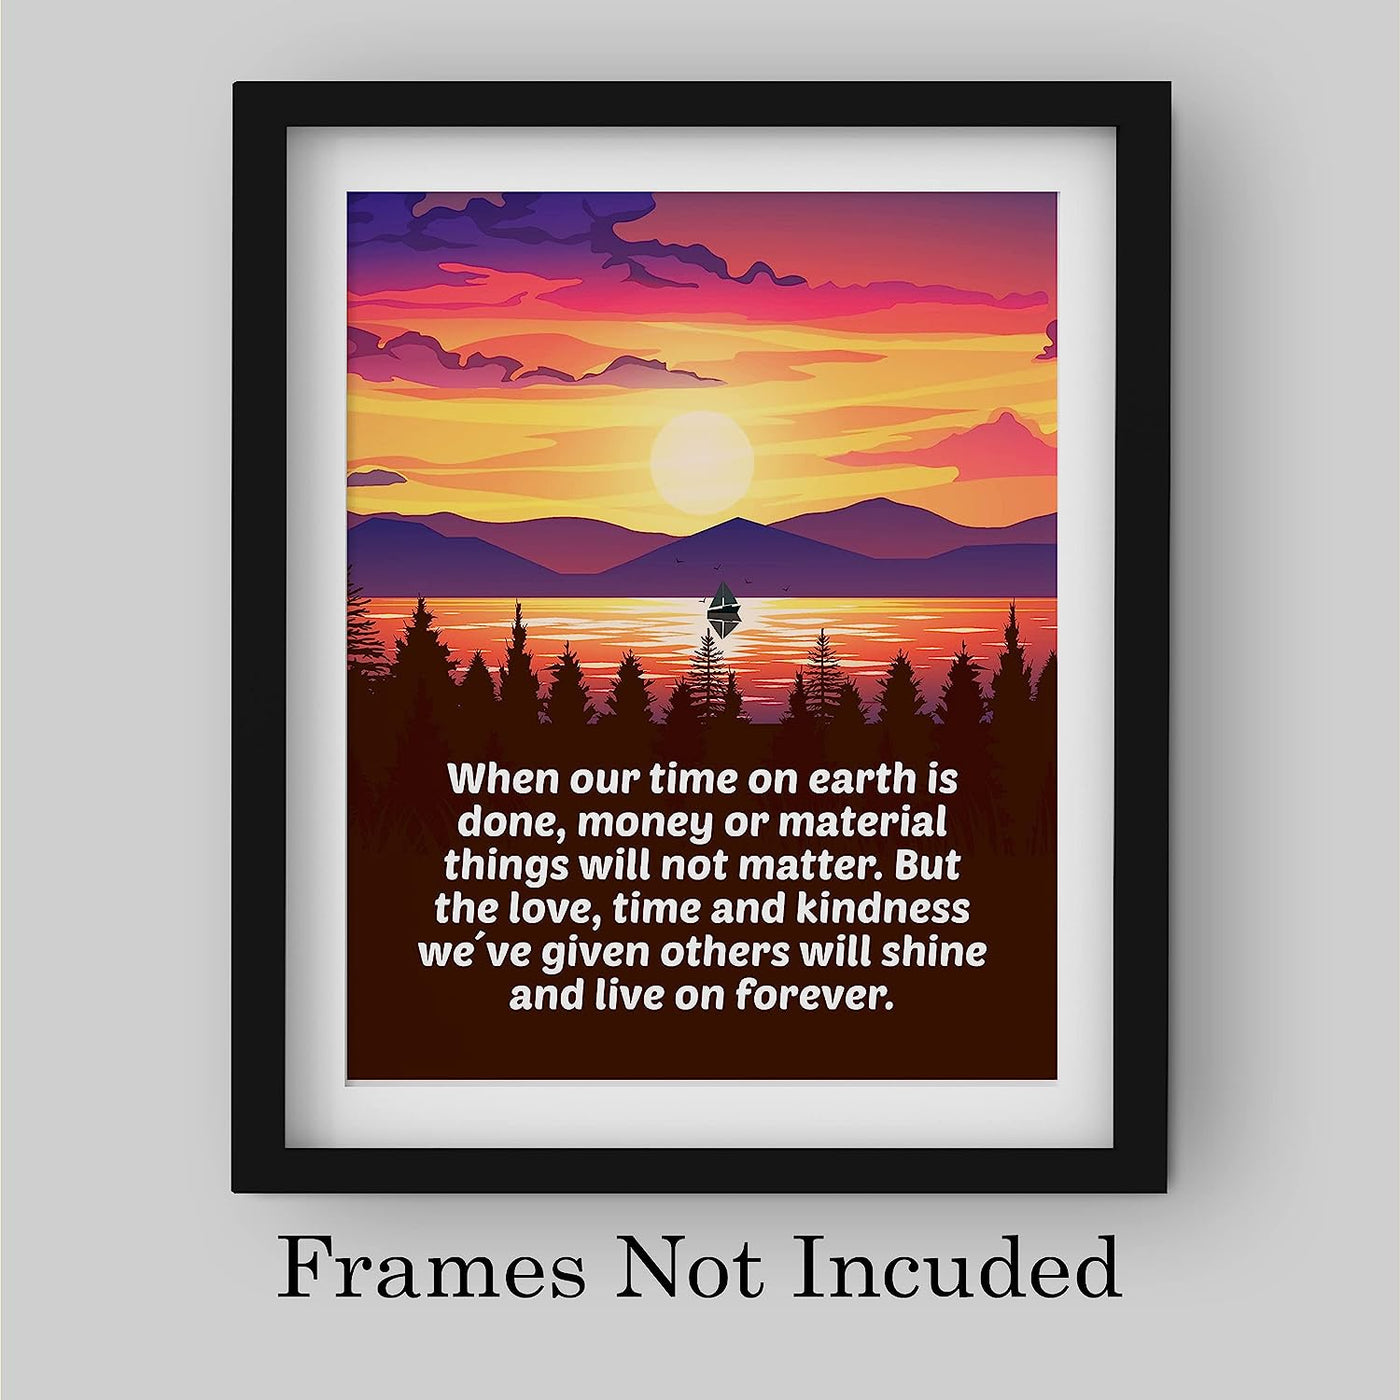 Love-Time-Kindness We Give Others Will Live On Inspirational Wall Art-8 x 10" Mountain Lake Sunset Print w/Boat Image-Ready to Frame. Motivational Home-Cabin-Lodge Decor. Great for Inspiration!